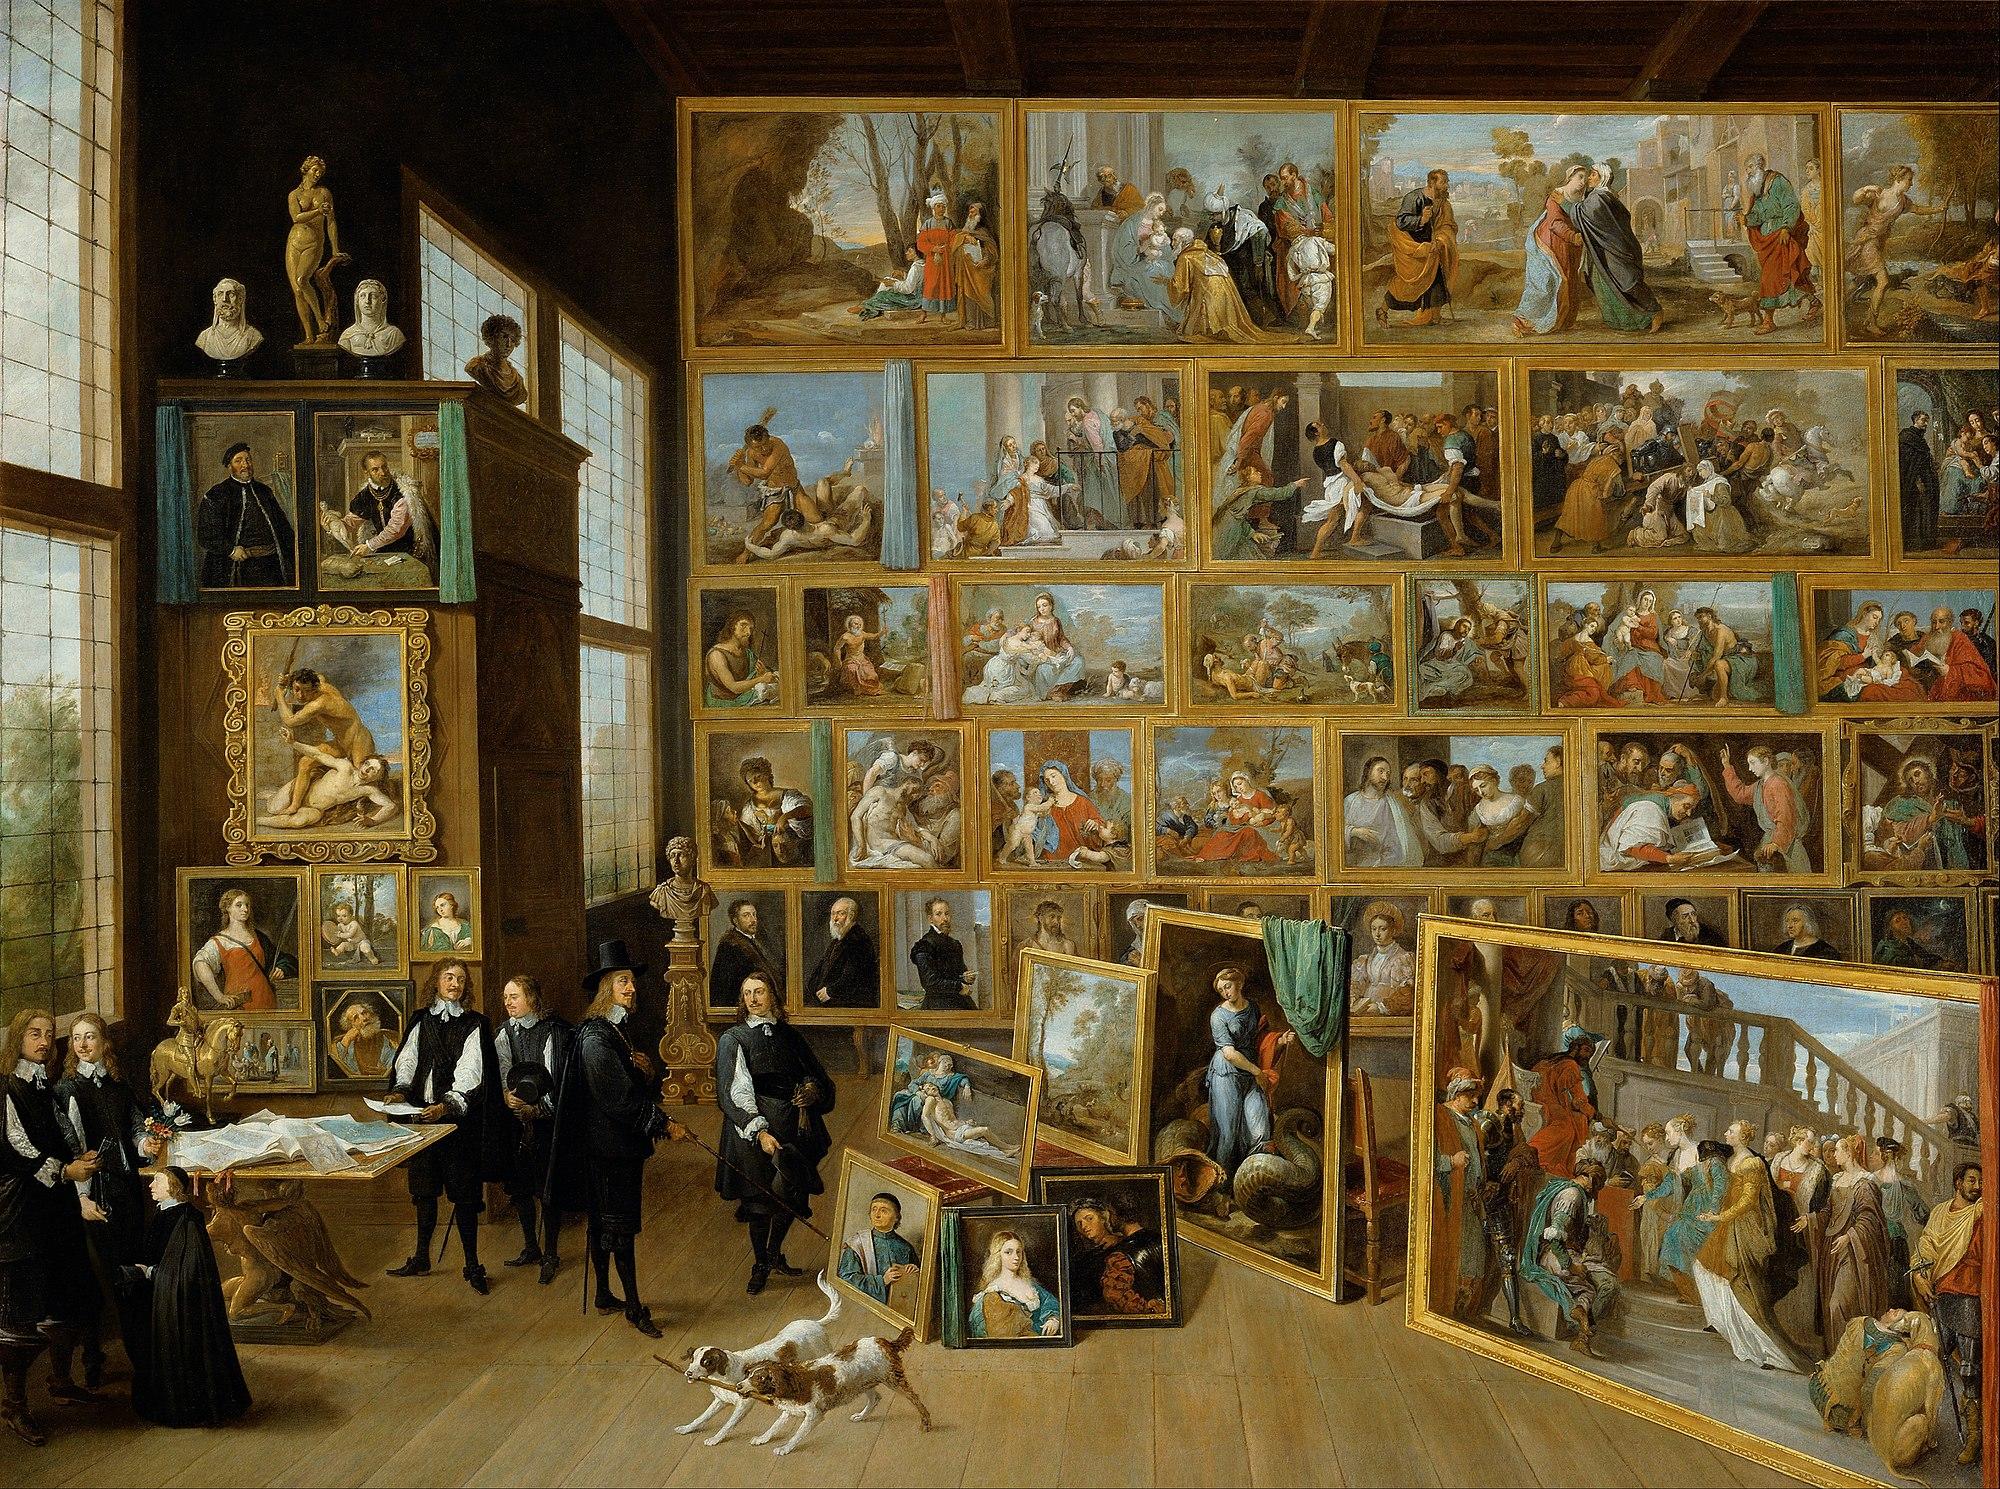 archduke-leopold-wilhelm-in-his-gallery-in-brussels-david-teniers-the-younger-162301-1067981